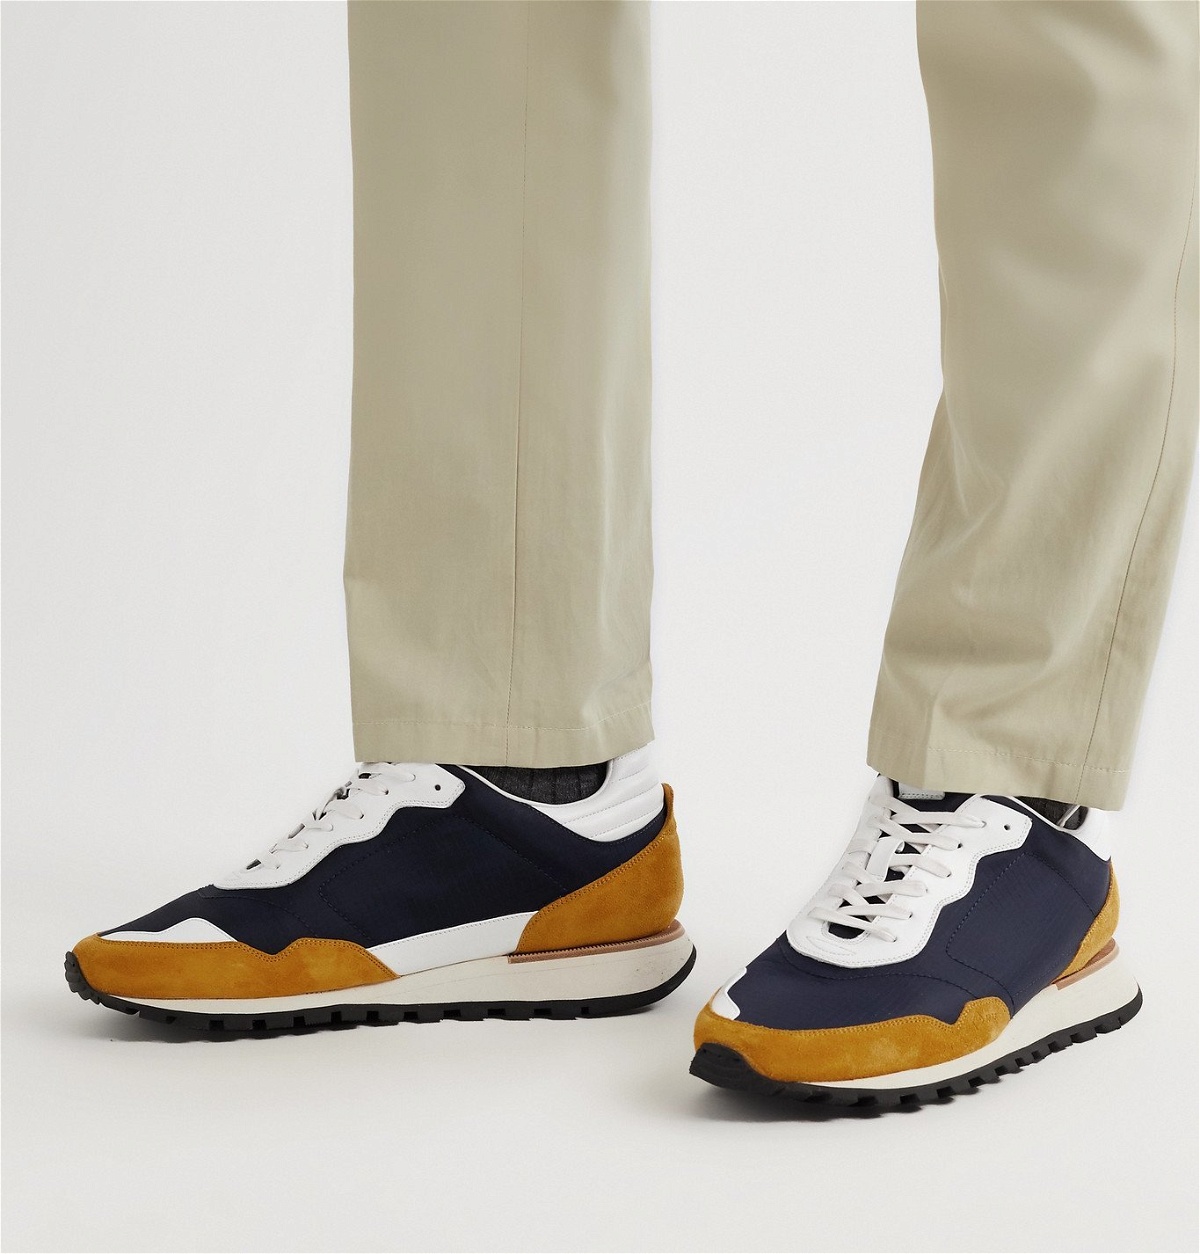 Dunhill - Axis Ripstop, Suede and Leather Sneakers - Blue Dunhill